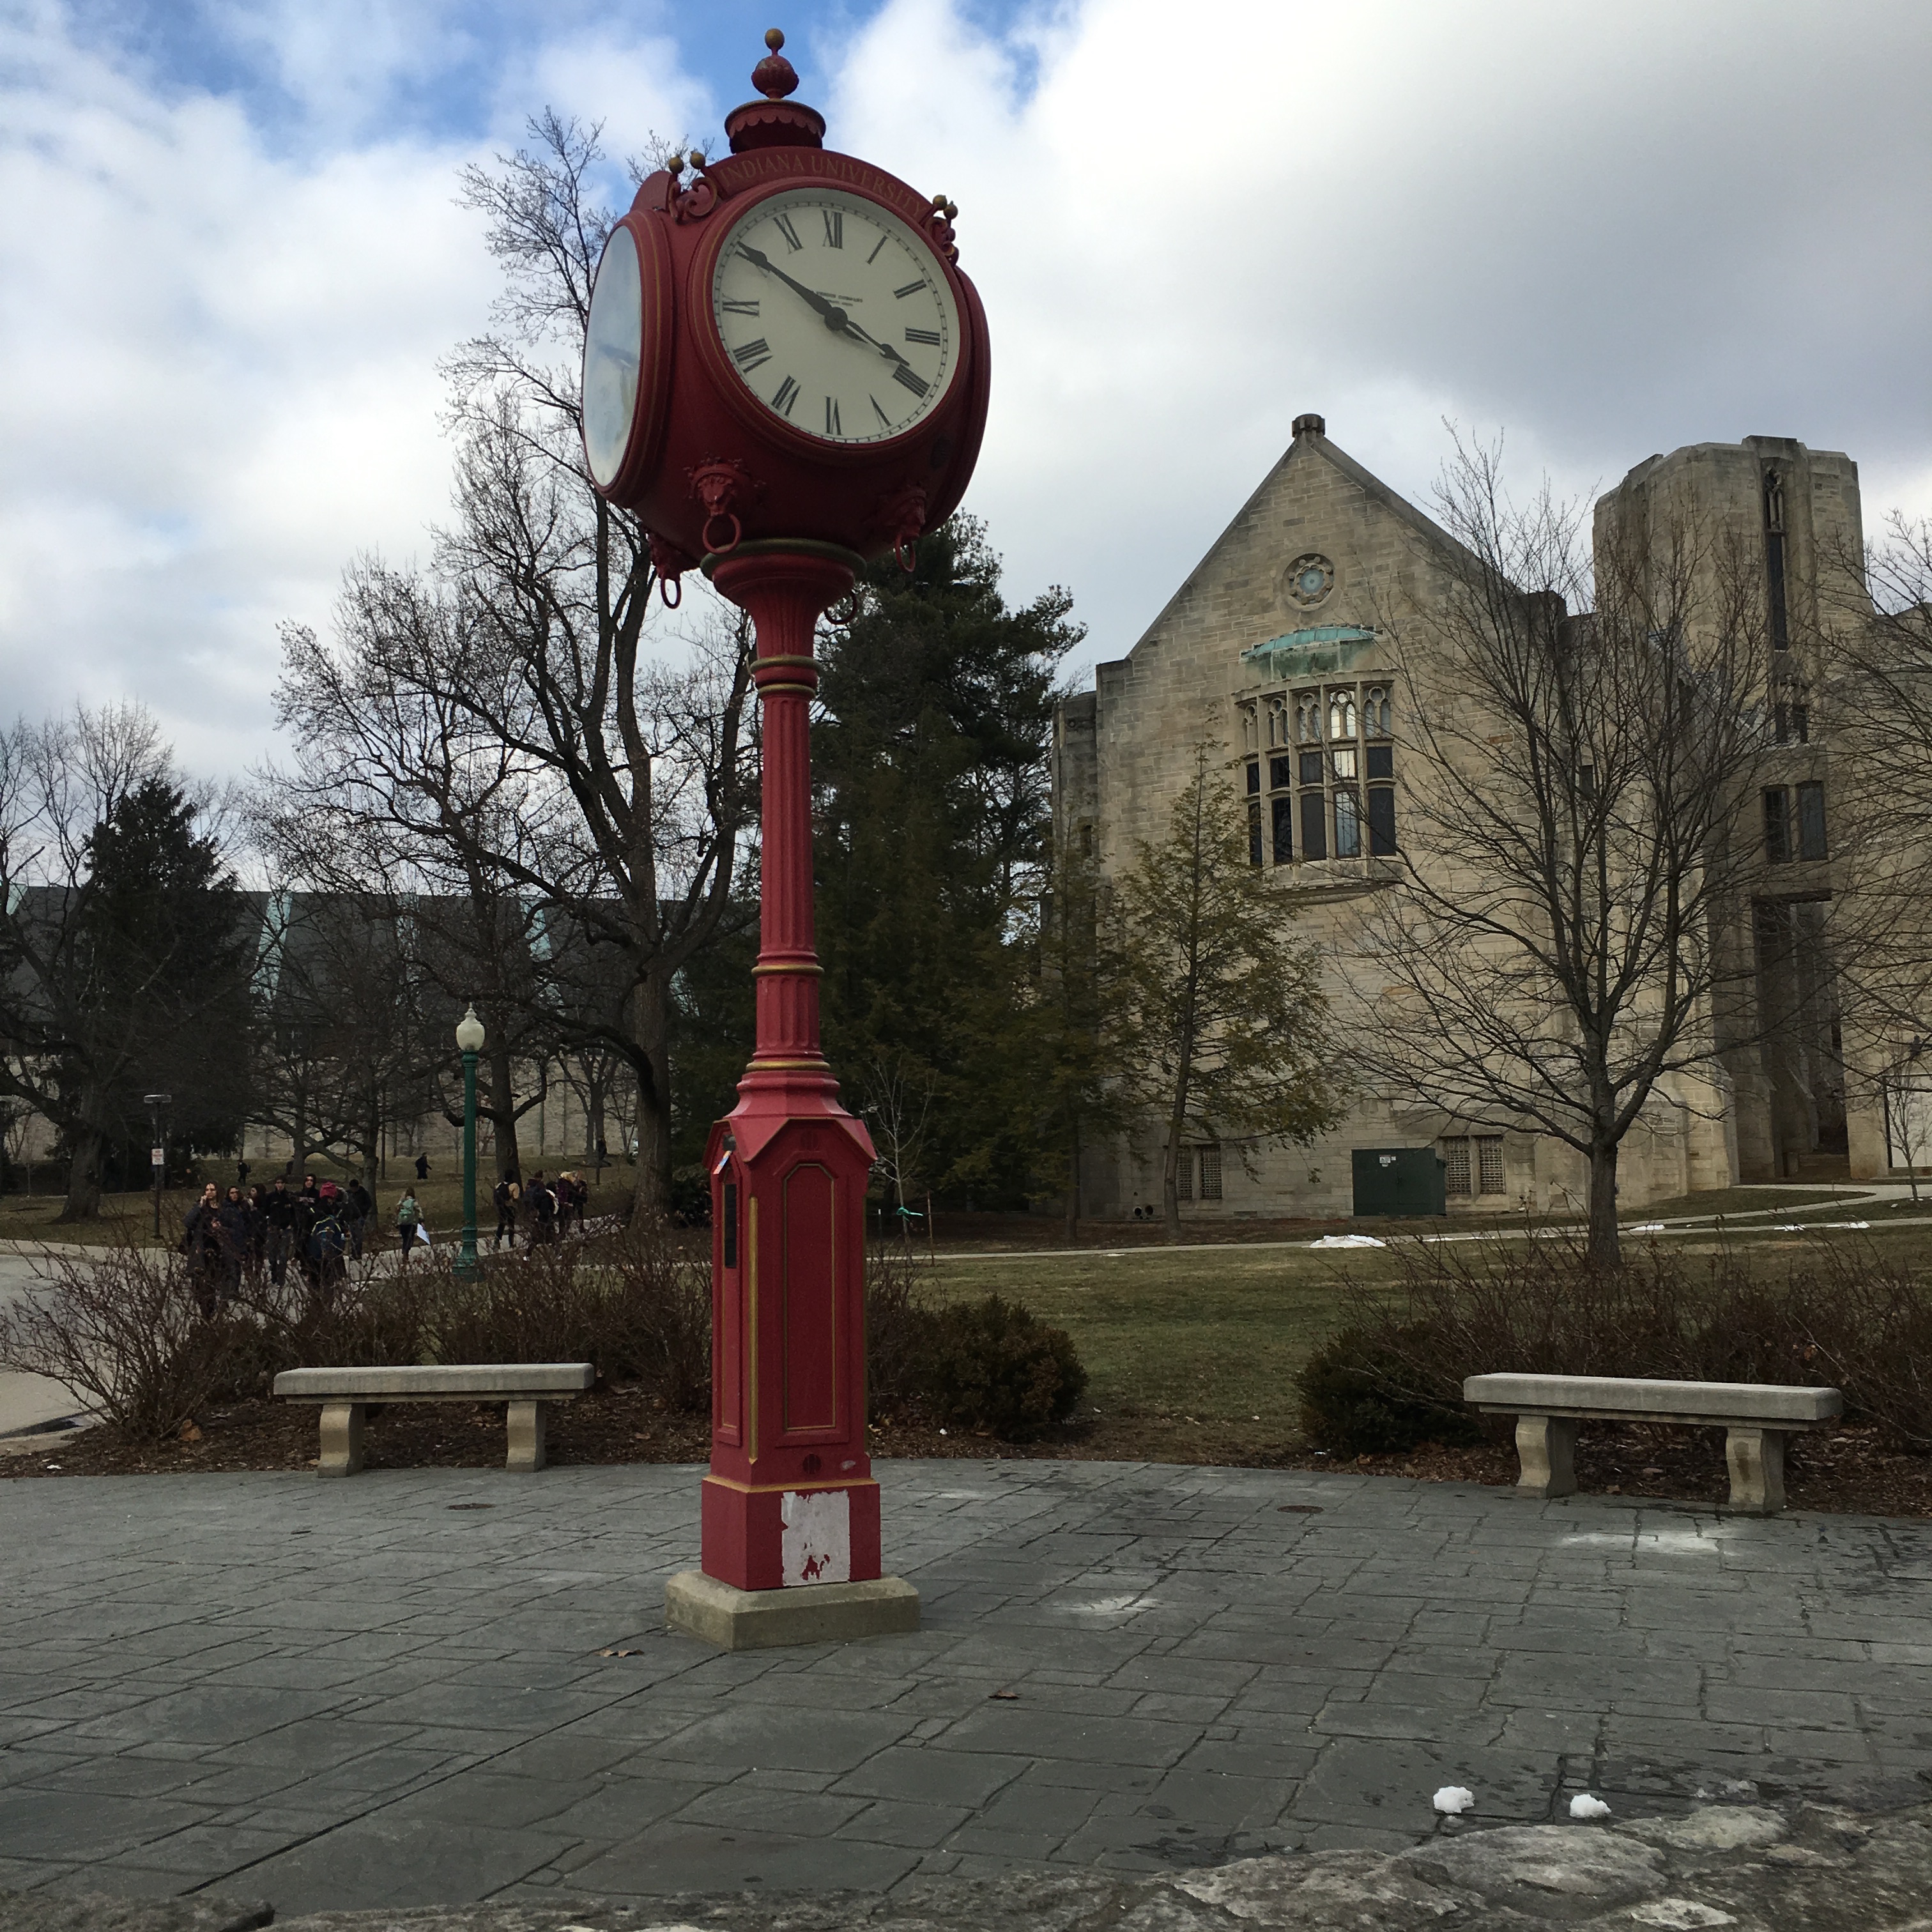 The clock tower at Indiana University, where Samantha Levinson saw a Muslim student harassed. | Photo by Samantha Levinson